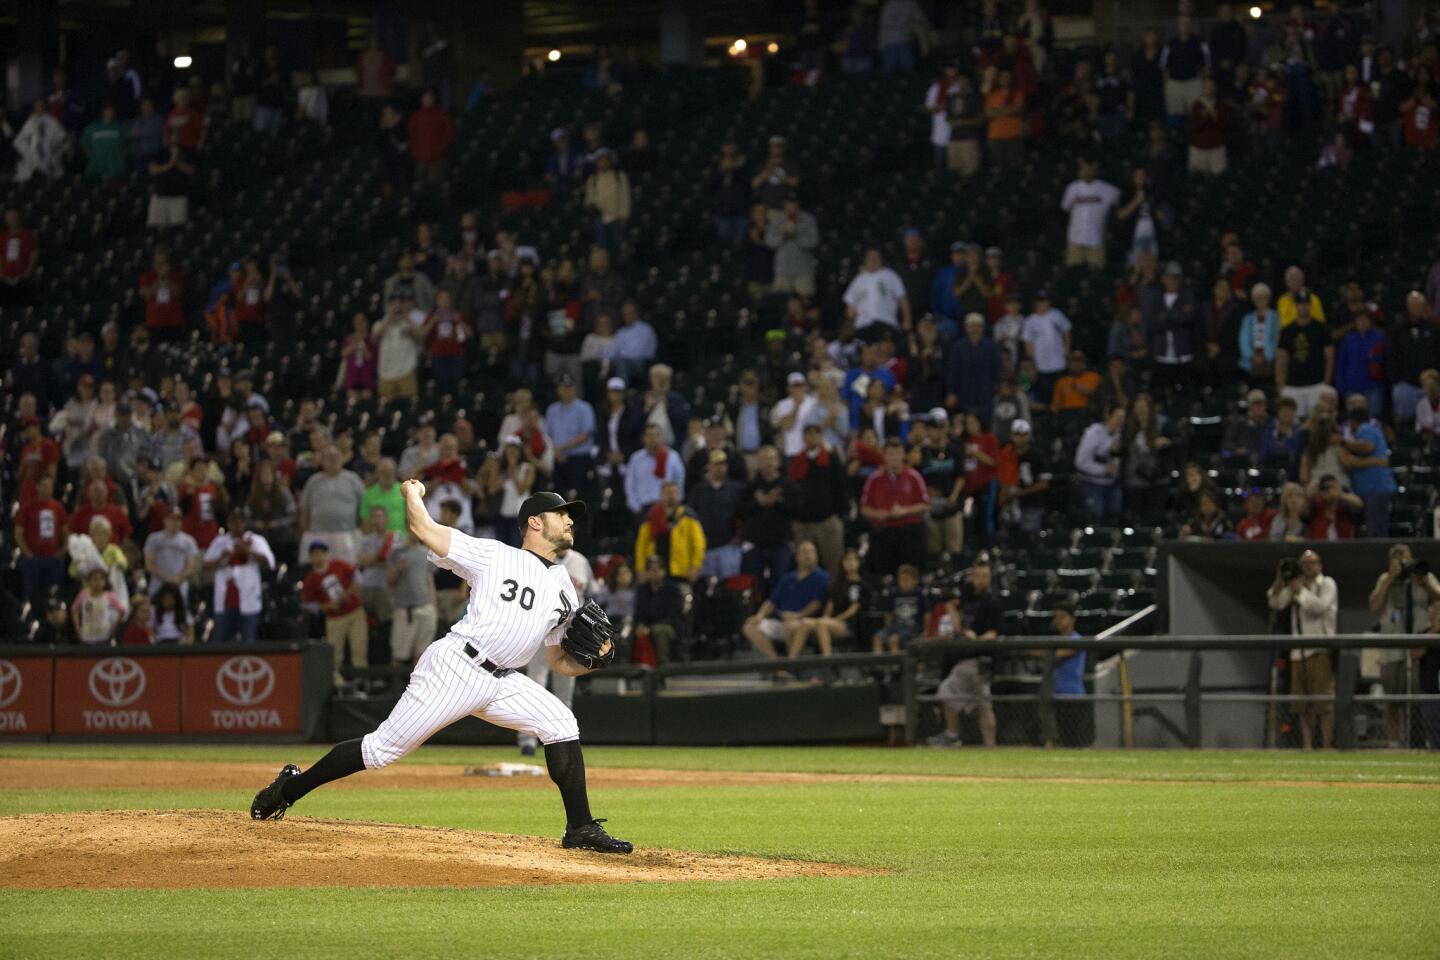 David Robertson throws the final pitch to end the game.